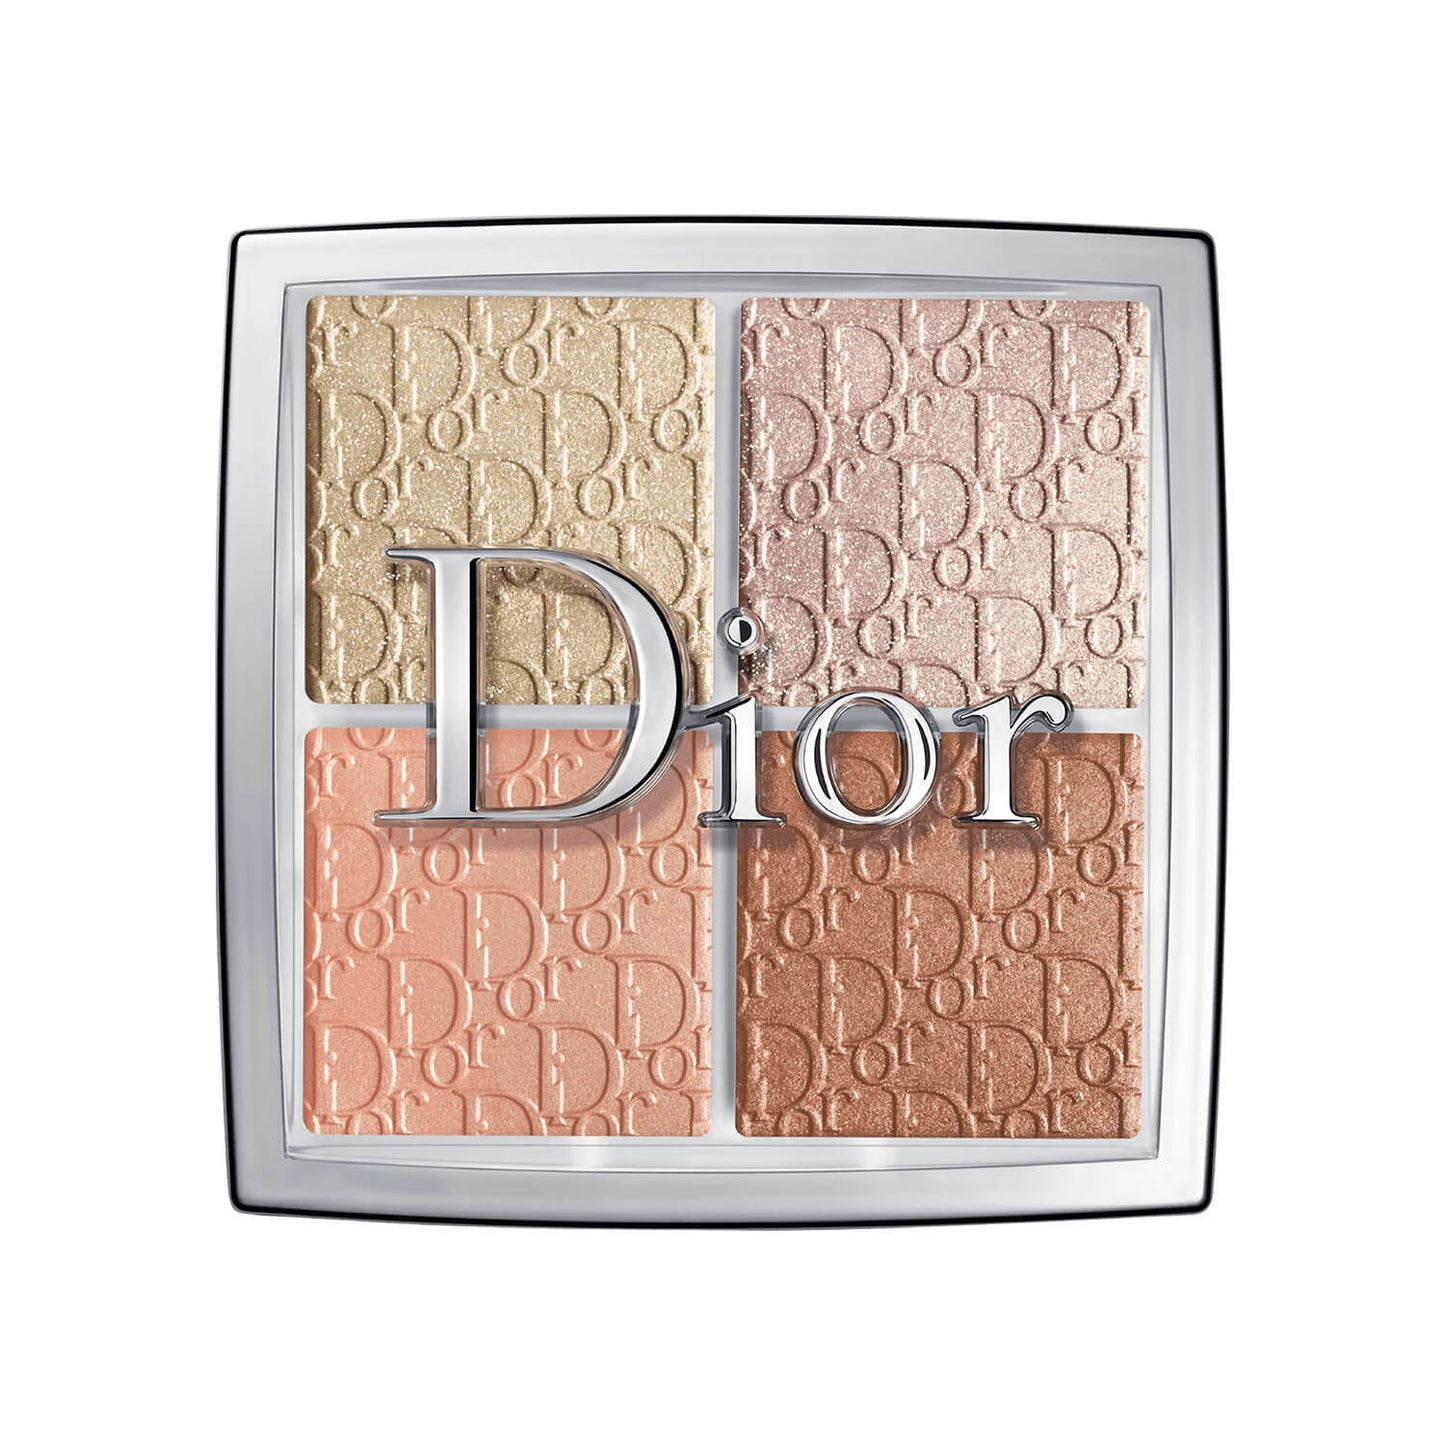 shop Dior backstage face glow palette available at Heygirl.pk for delivery in Pakistan